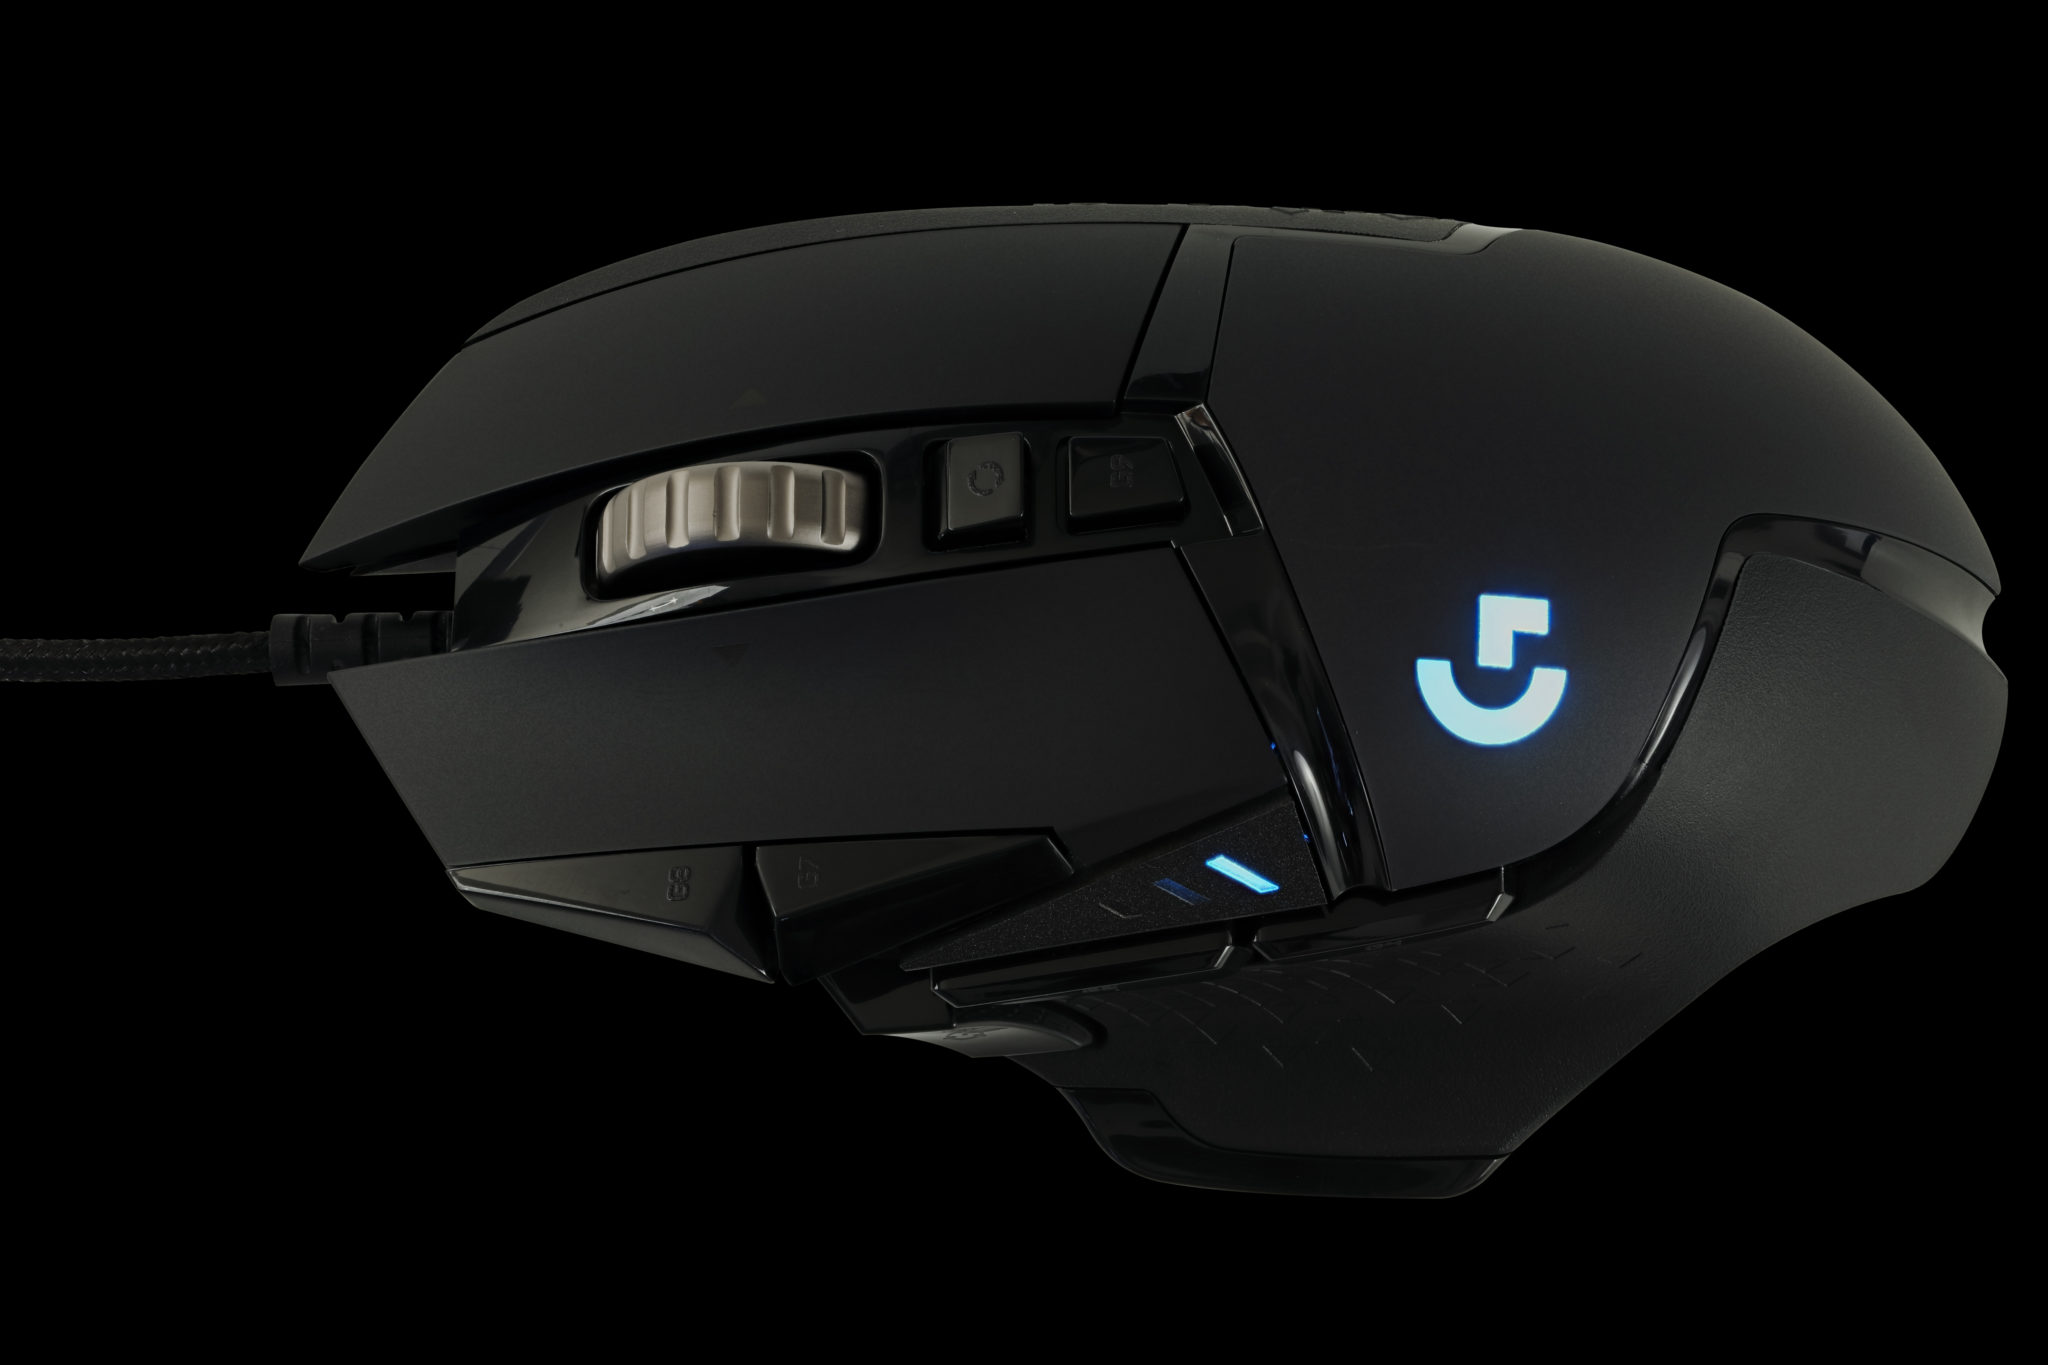 Logitech G502 Hero High Performance Gaming Mouse - Optical - Cable - USB -  25600 dpi - 11 Button(s) 